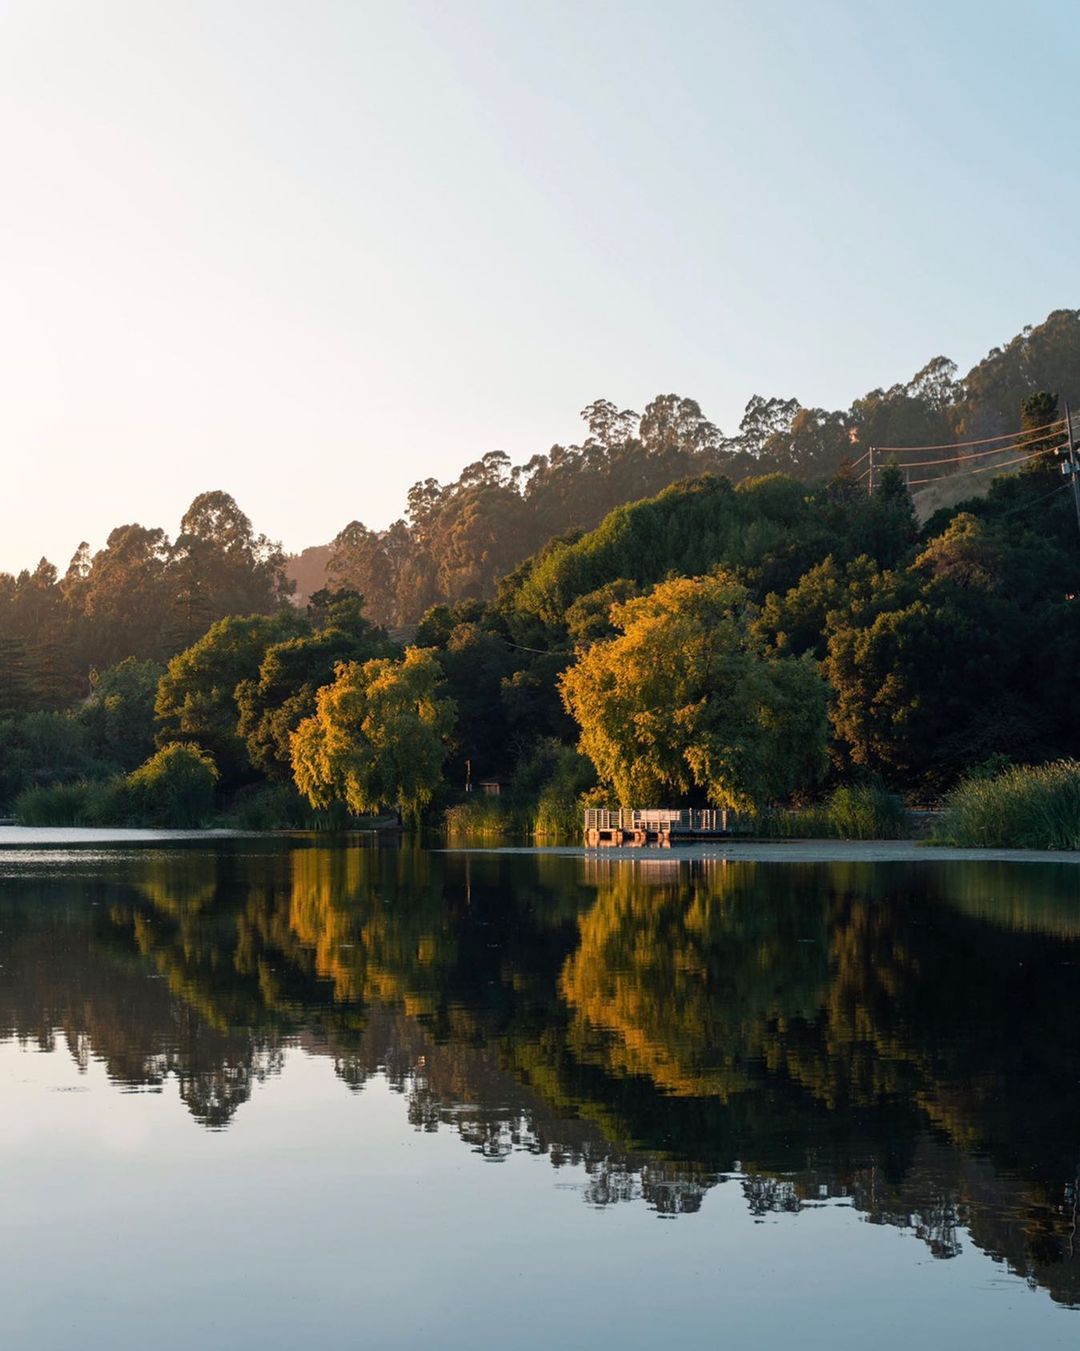 Lake Temescal at sunset with the reflection of trees on the still water. Photo by Instagram username @ryan.a.sullivan